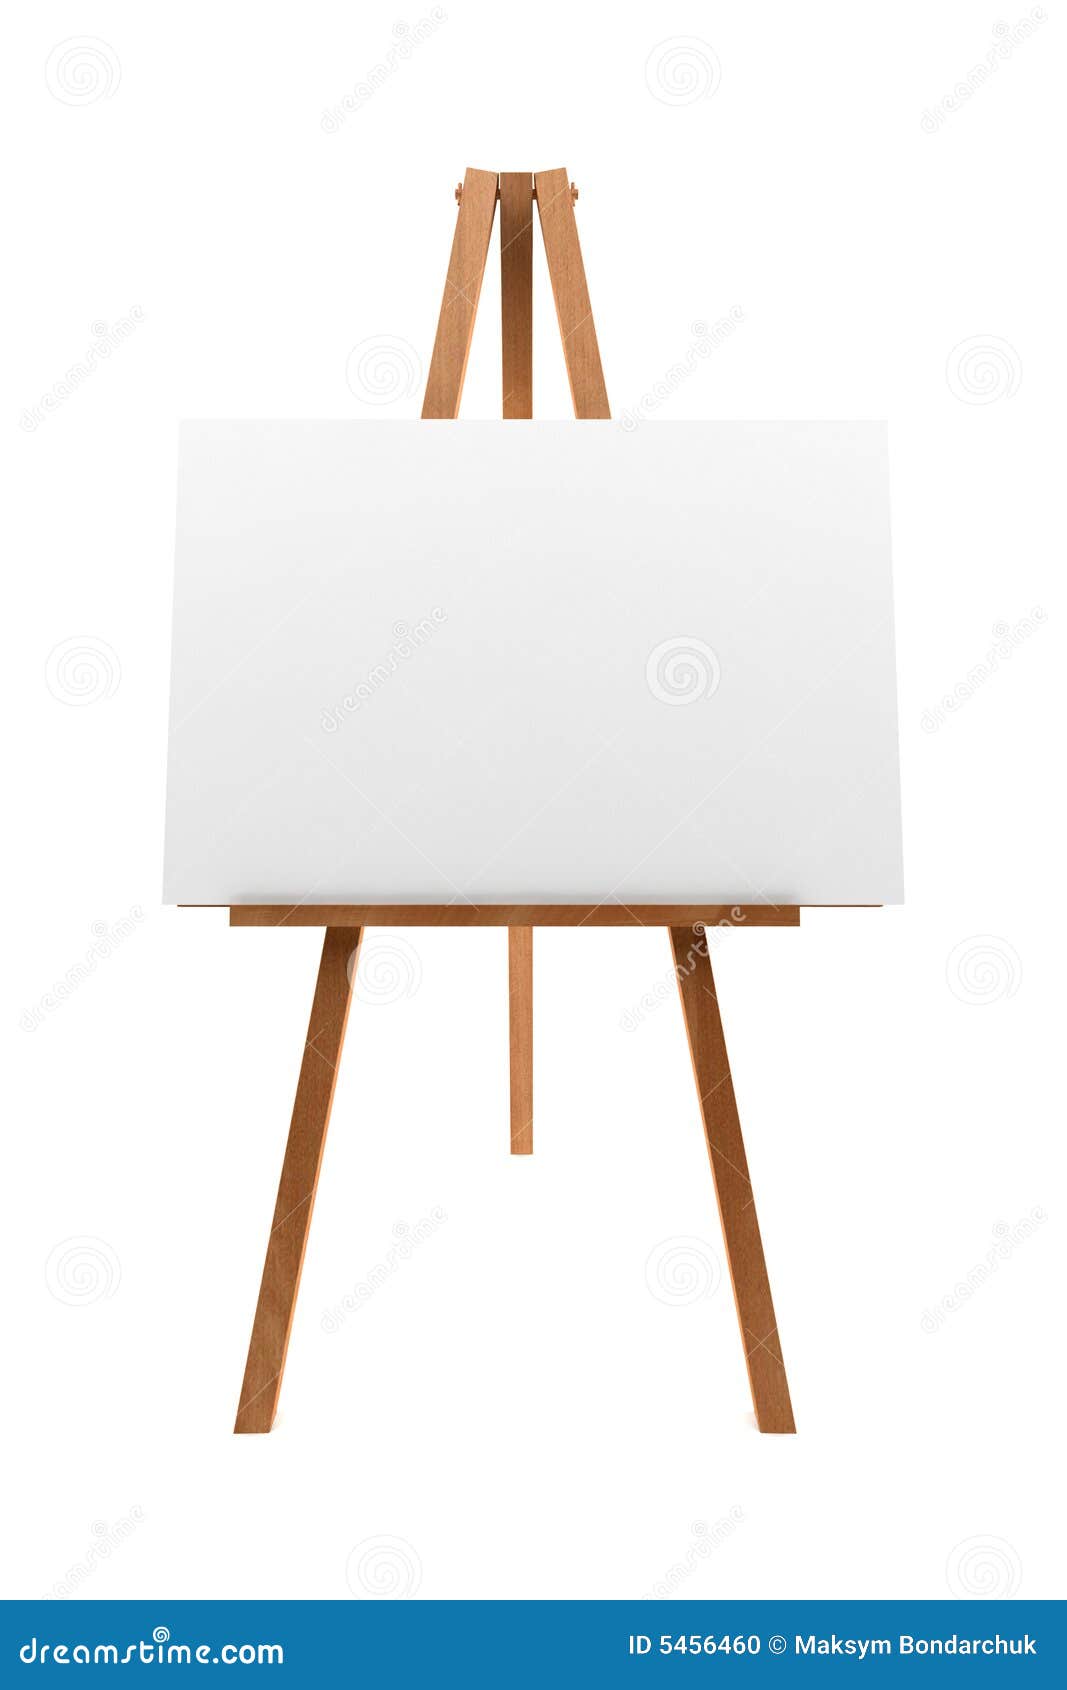 Wooden Easel Blank Canvas Board Painting Tools Children White